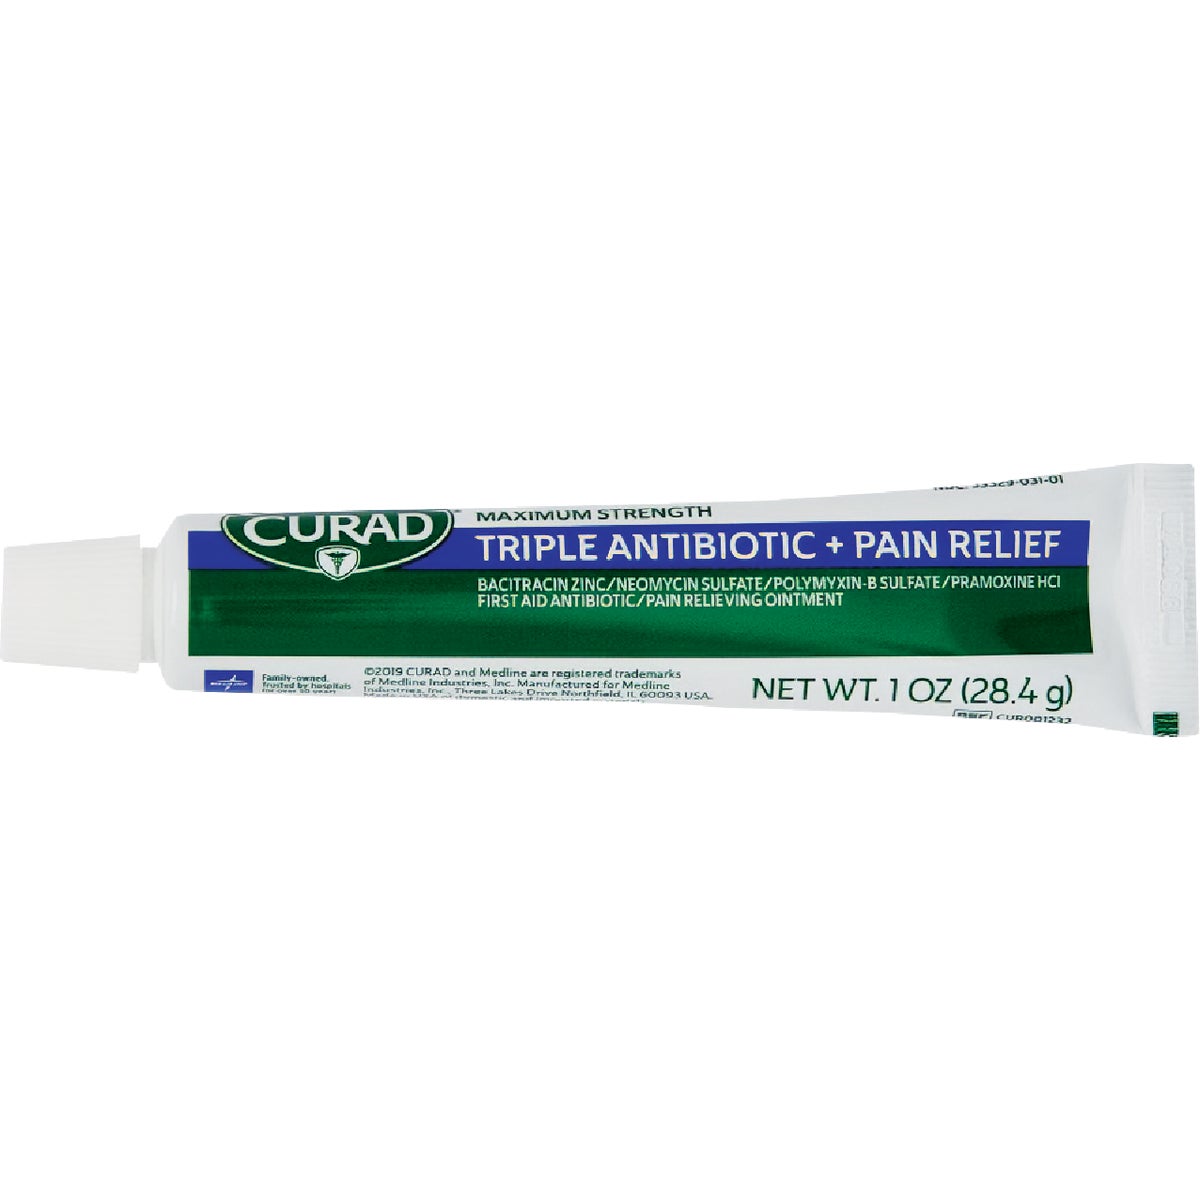 Item 602105, Curad Triple Antibiotic Plus Pain Relief Ointment to help prevent infection